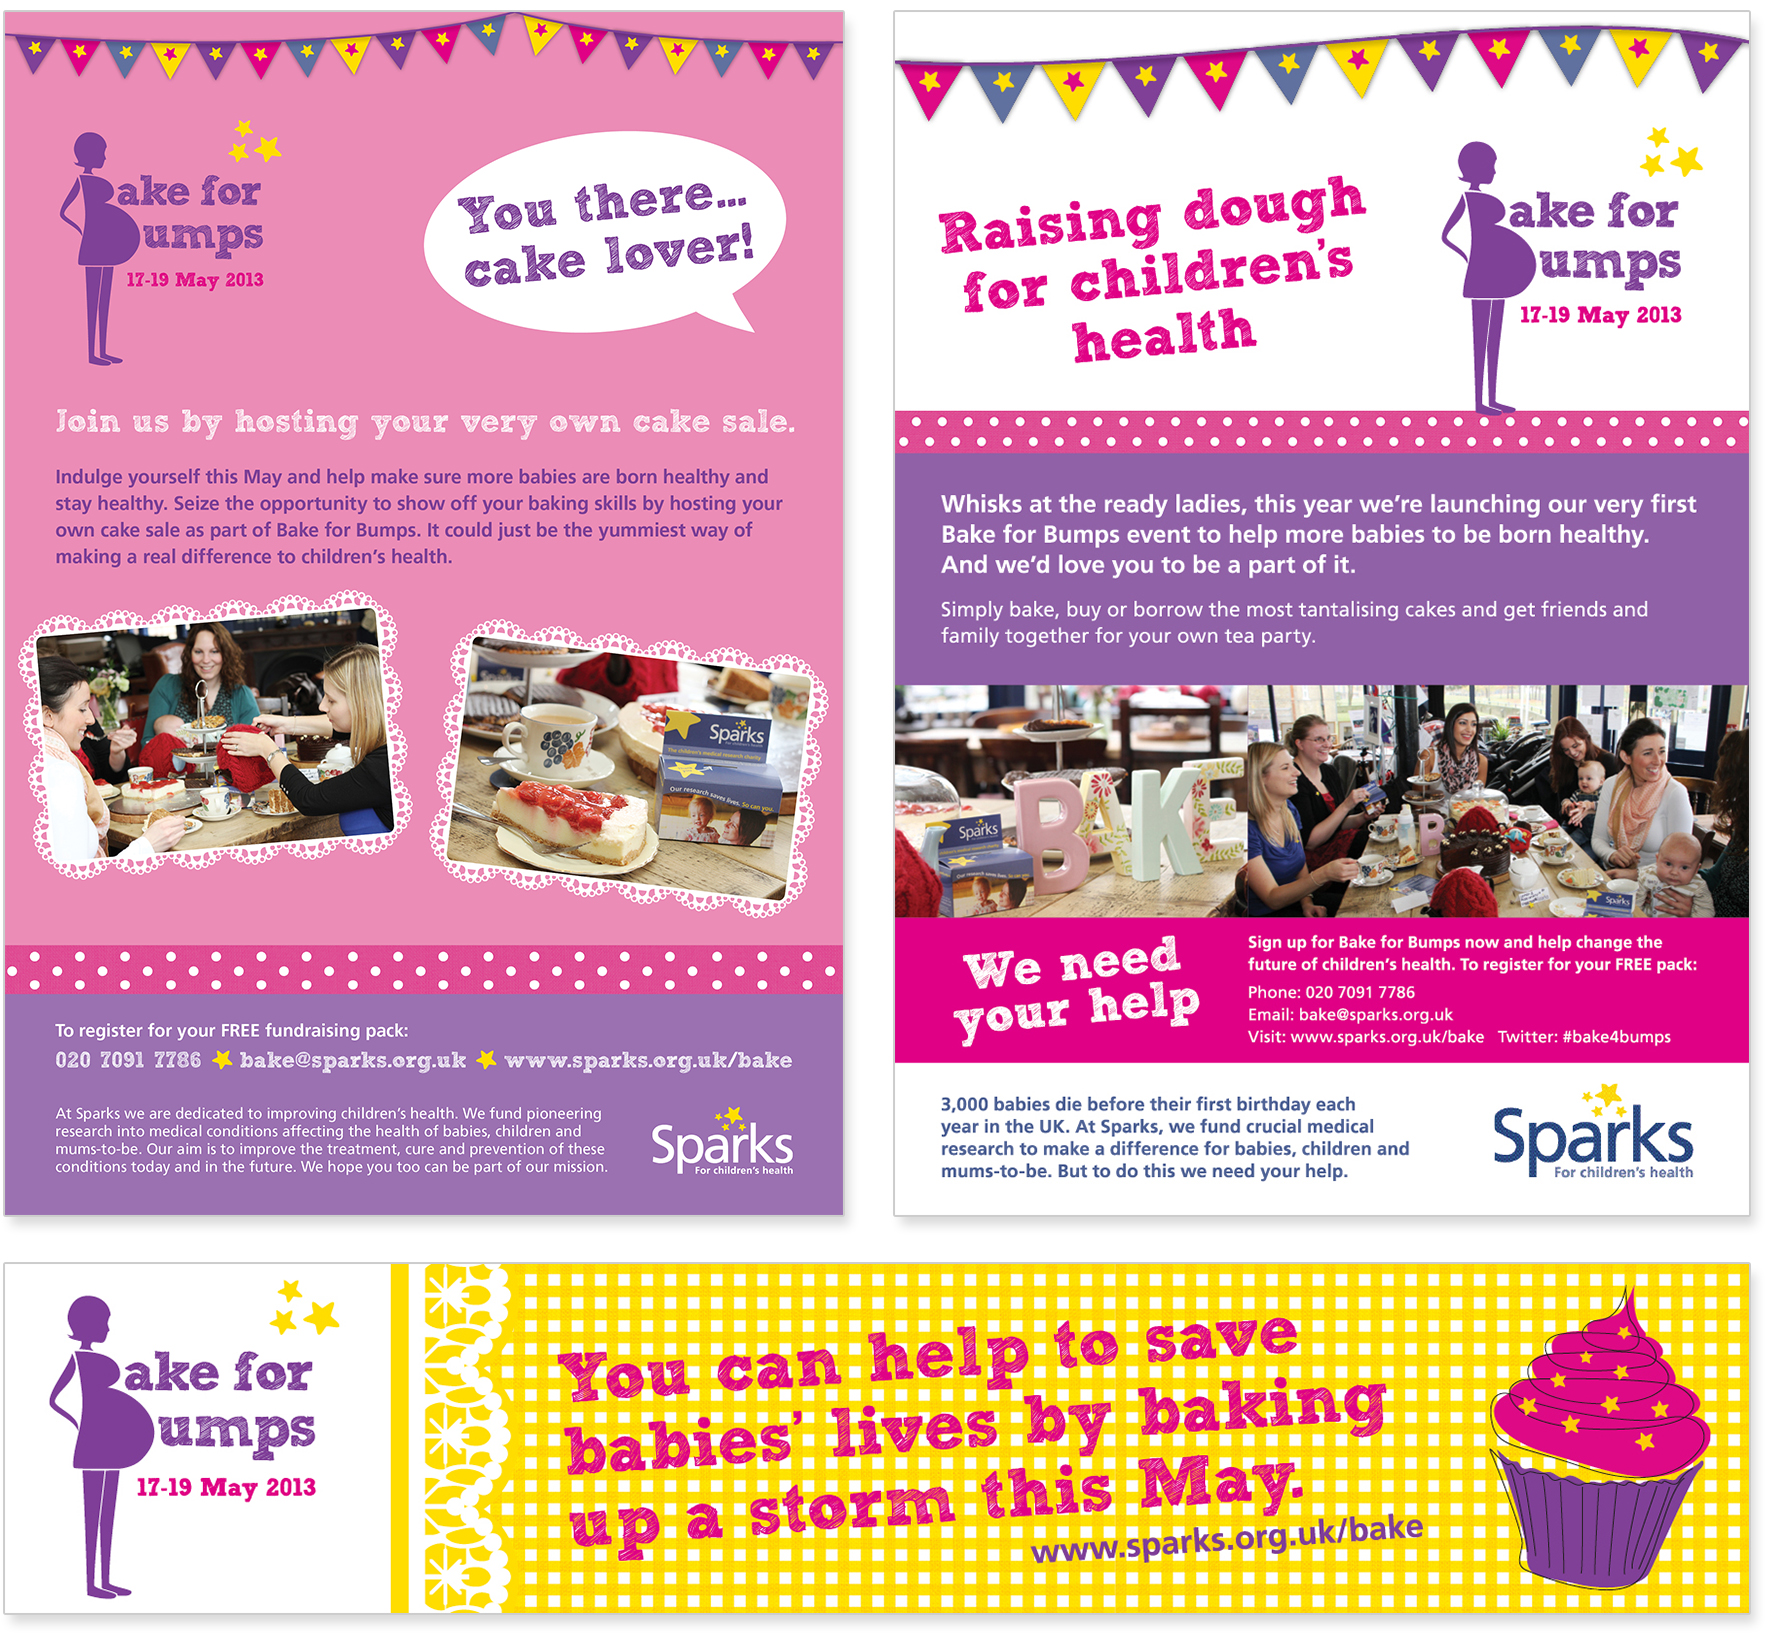 Advertisements for Sparks Bake for Bumps campaign